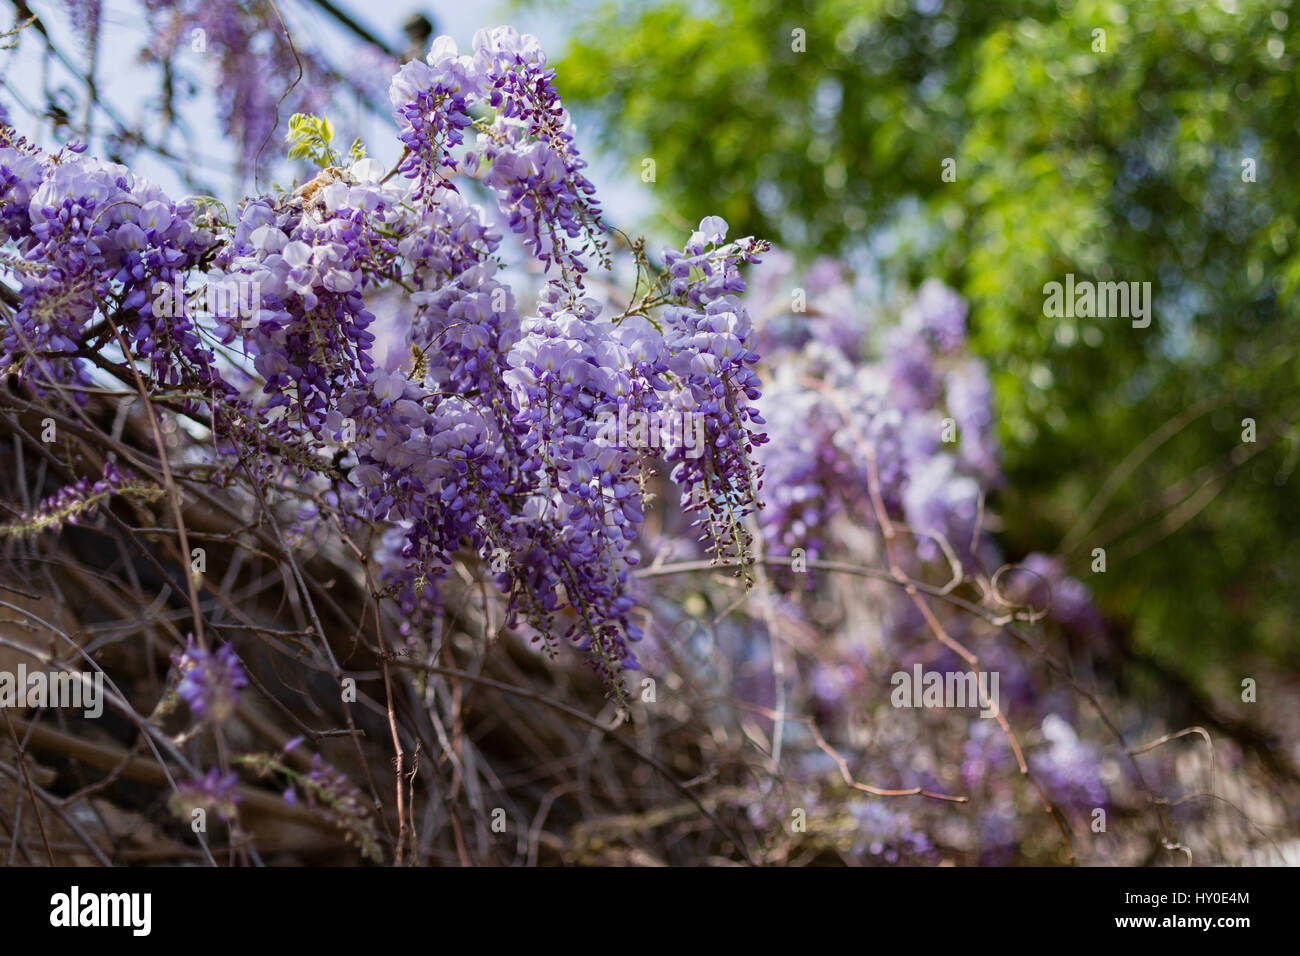 Wisteria blossom against blurred tree leaves with some wisteria in sharp focus and other wisteria blurred Stock Photo